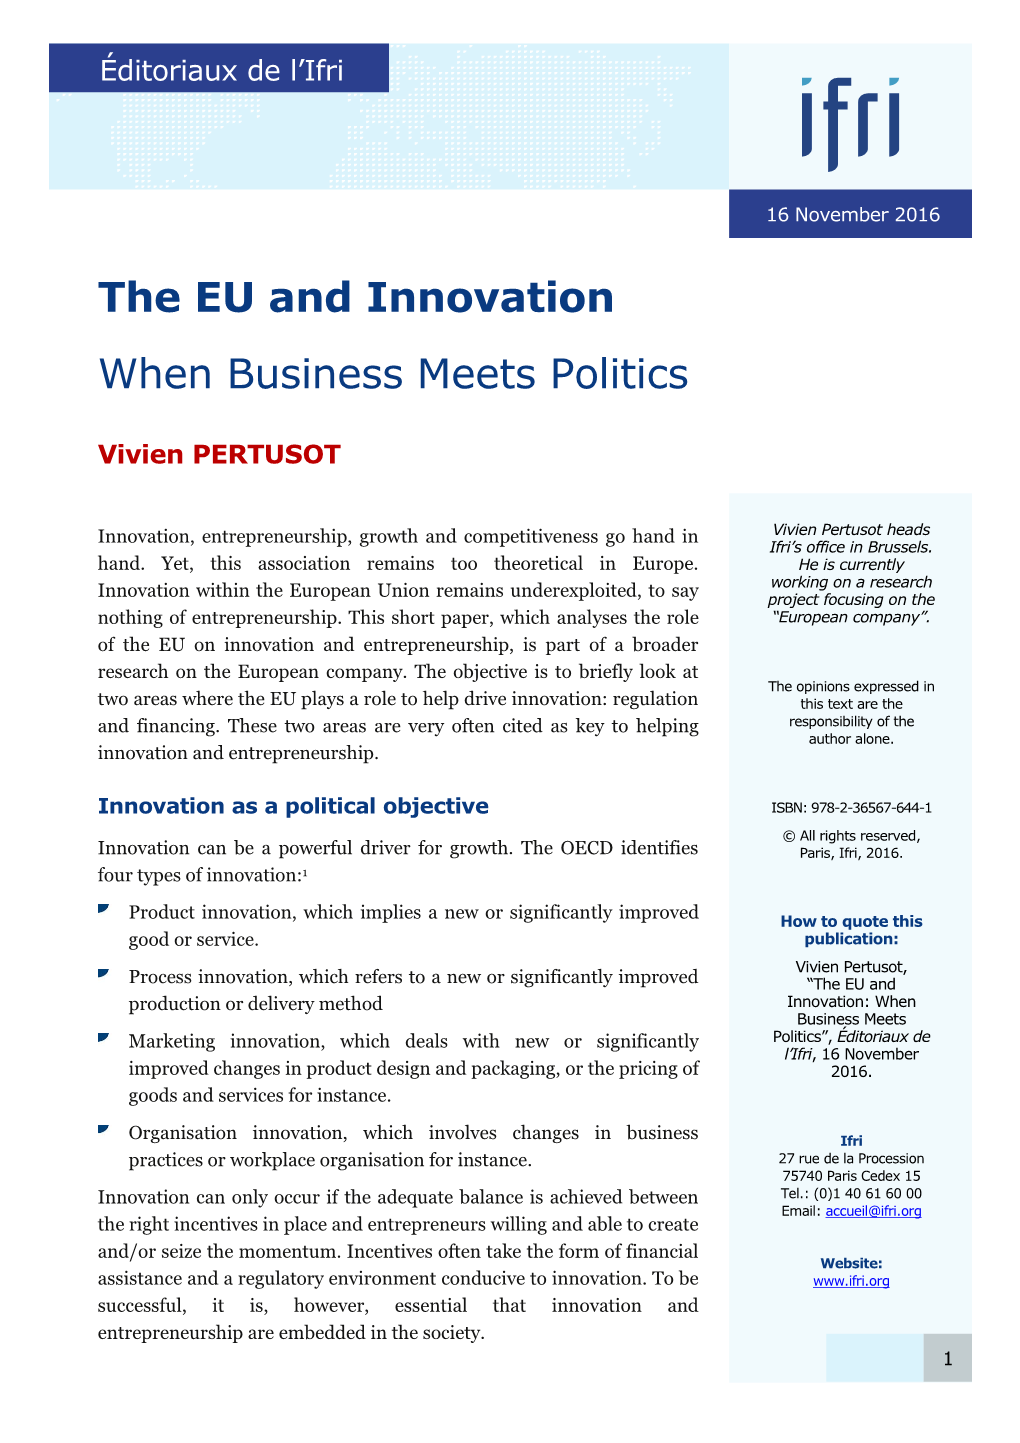 The EU and Innovation: When Business Meets Politics